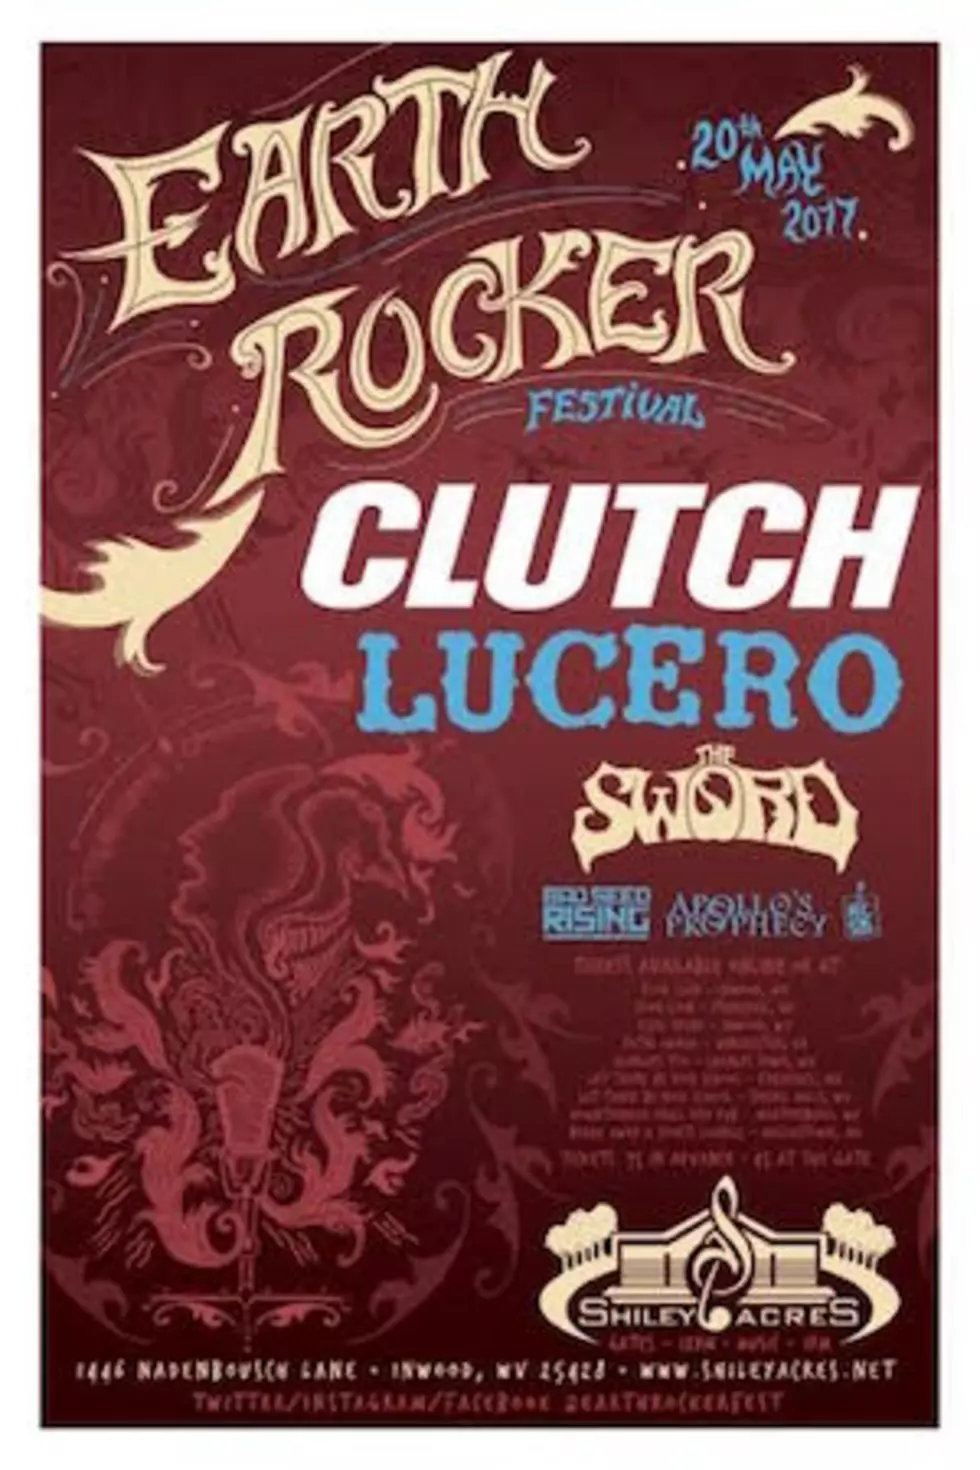 Clutch Book First Ever &#8216;Earth Rocker Festival&#8217; With Lucero, The Sword + More